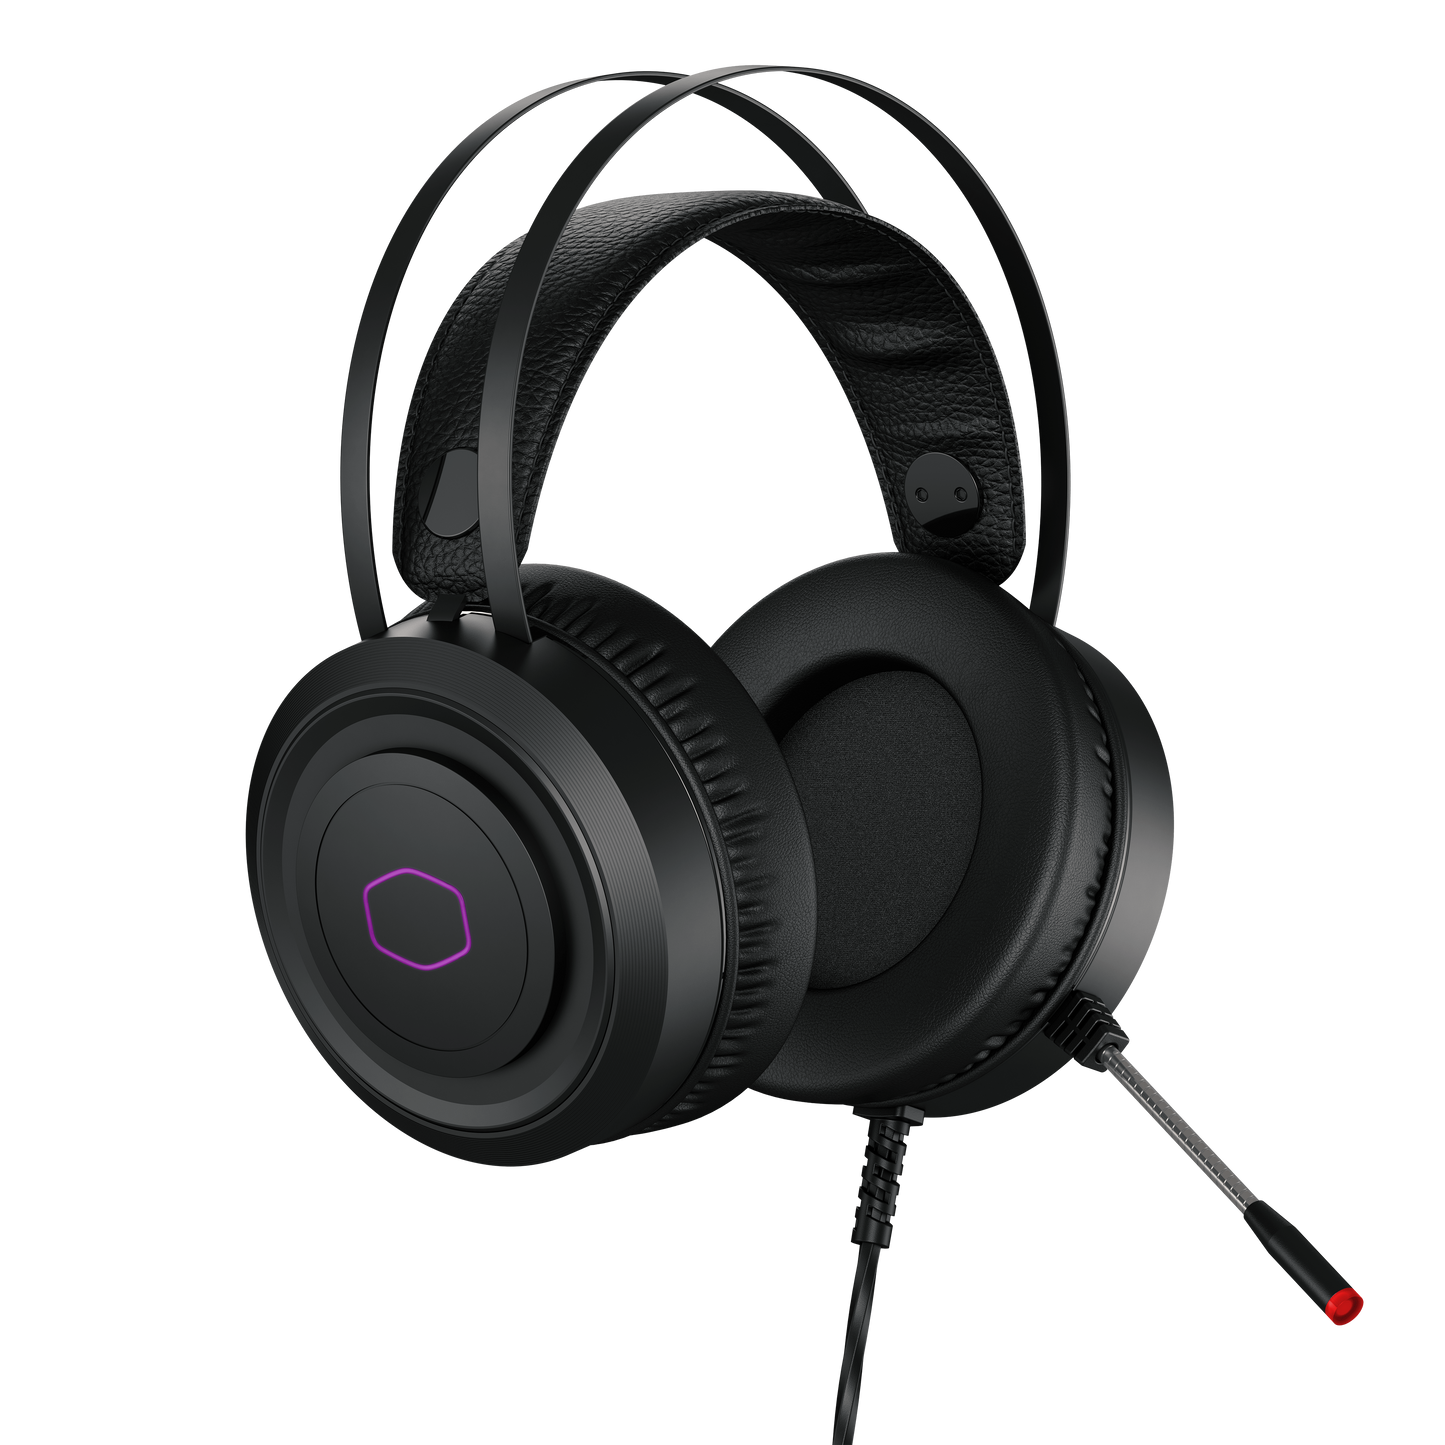 AURICULARES COOLER MASTER CH-321 USB RGB